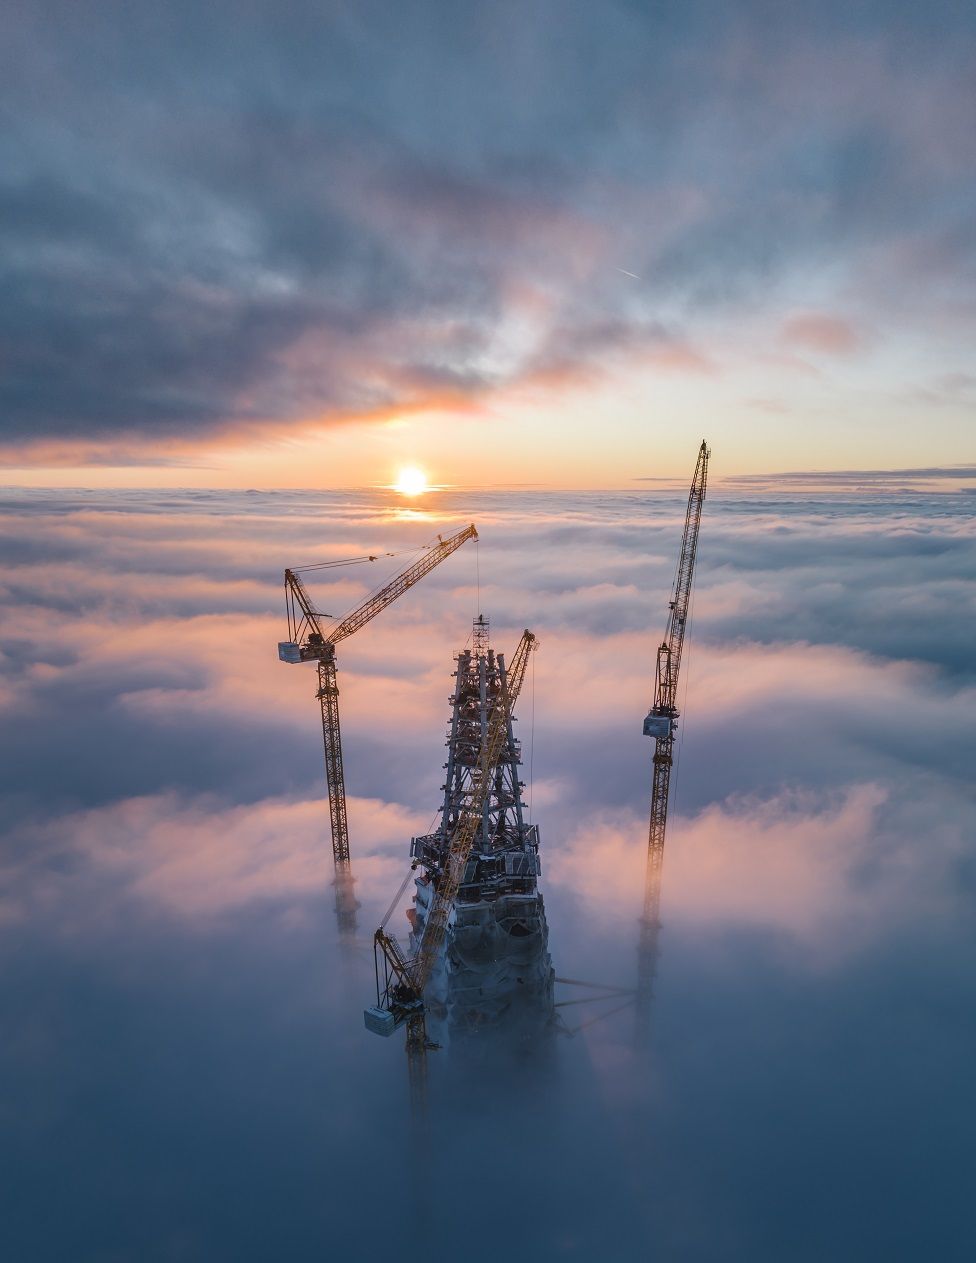 A skyscraper and two cranes poking above clouds